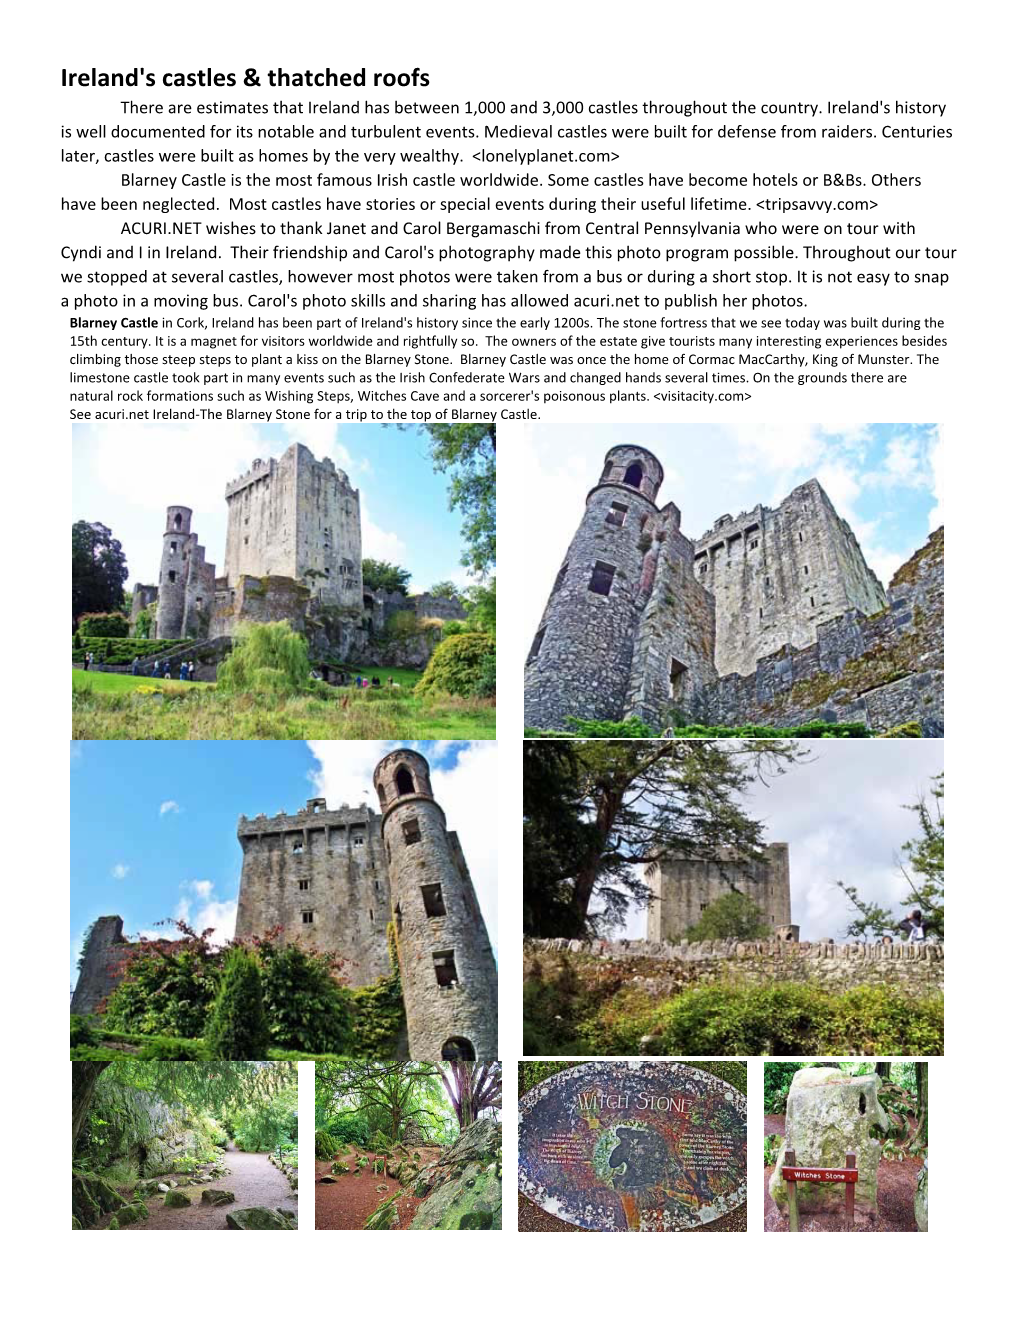 Ireland's Castles & Thatched Roofs